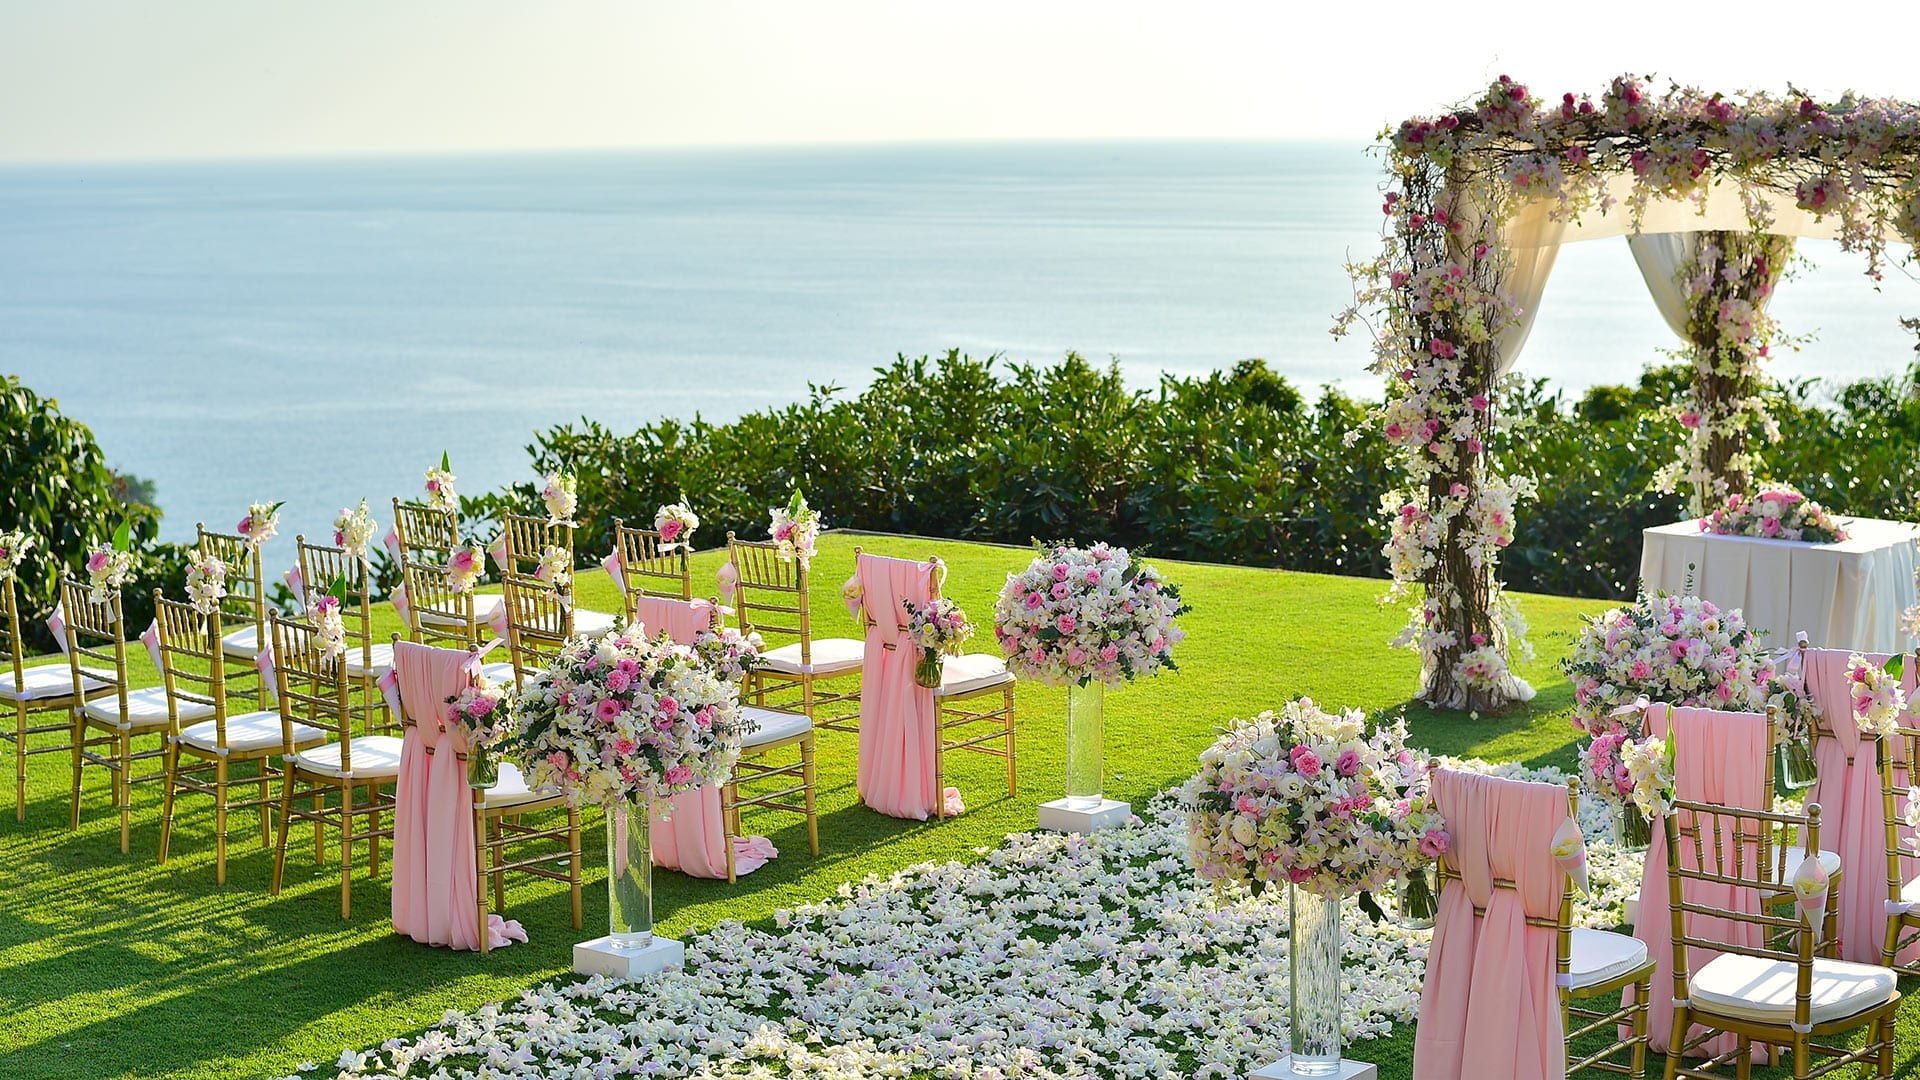 How to find the perfect wedding venue